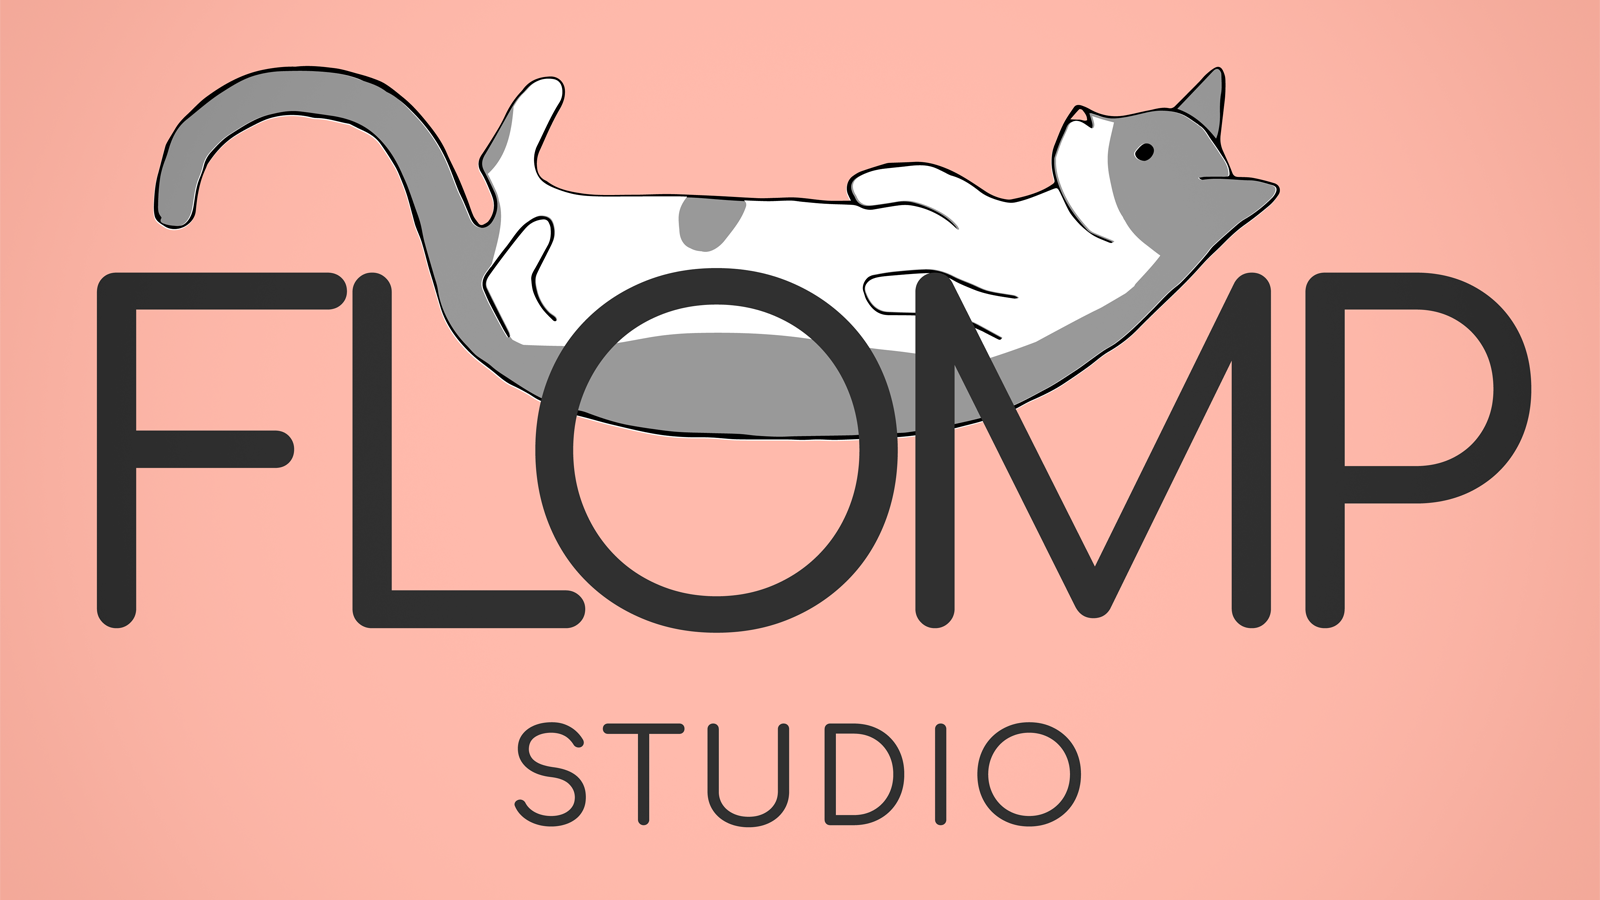 Flomp Studio logo on a pink background with a cat flomped on the words.